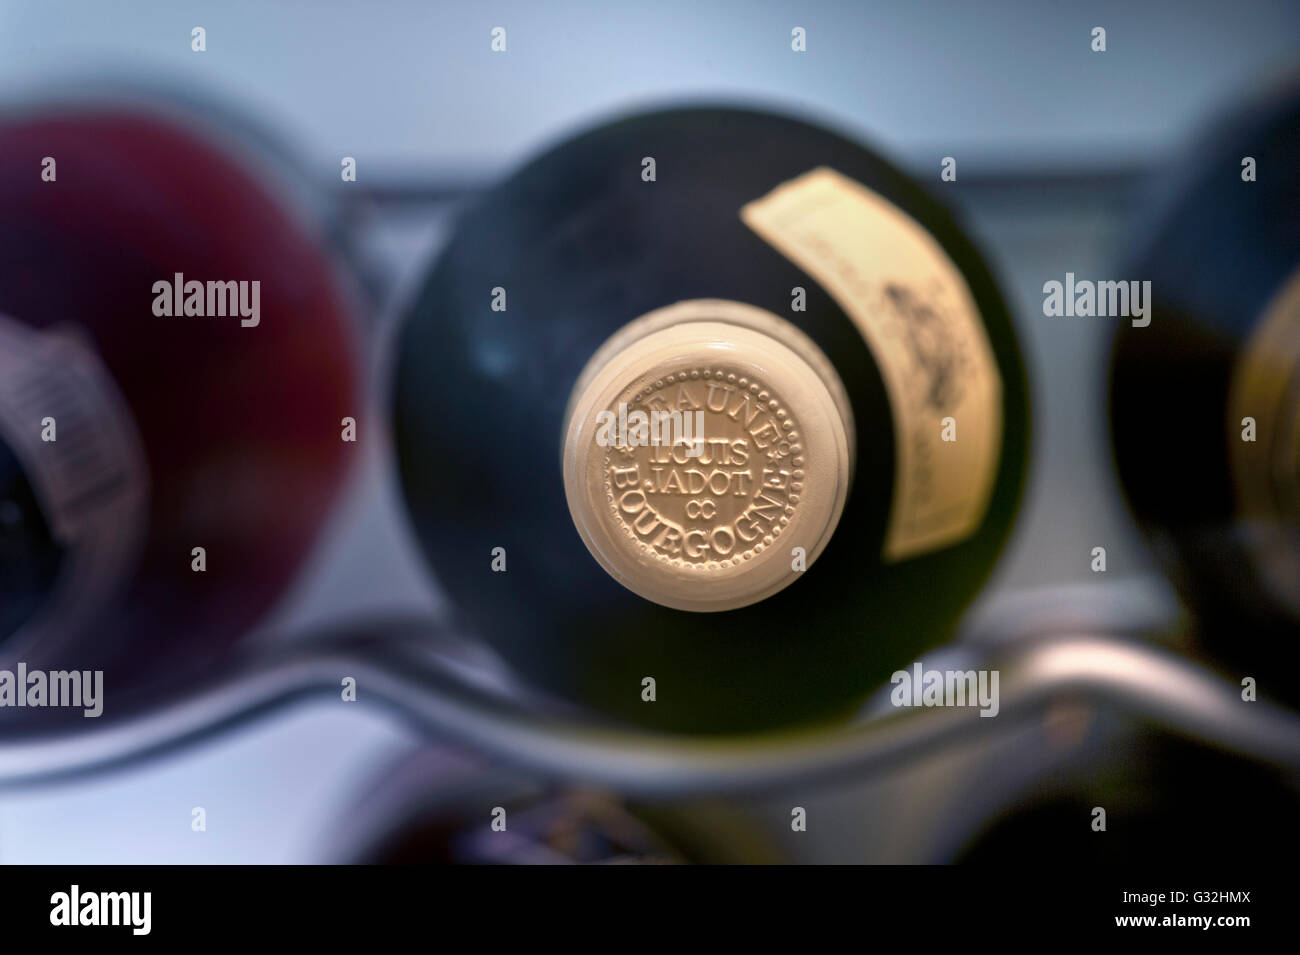 Louis Jadot encapsulation bottle top fine white Burgundy wine bottle stored in controlled temperature wine cabinet Stock Photo